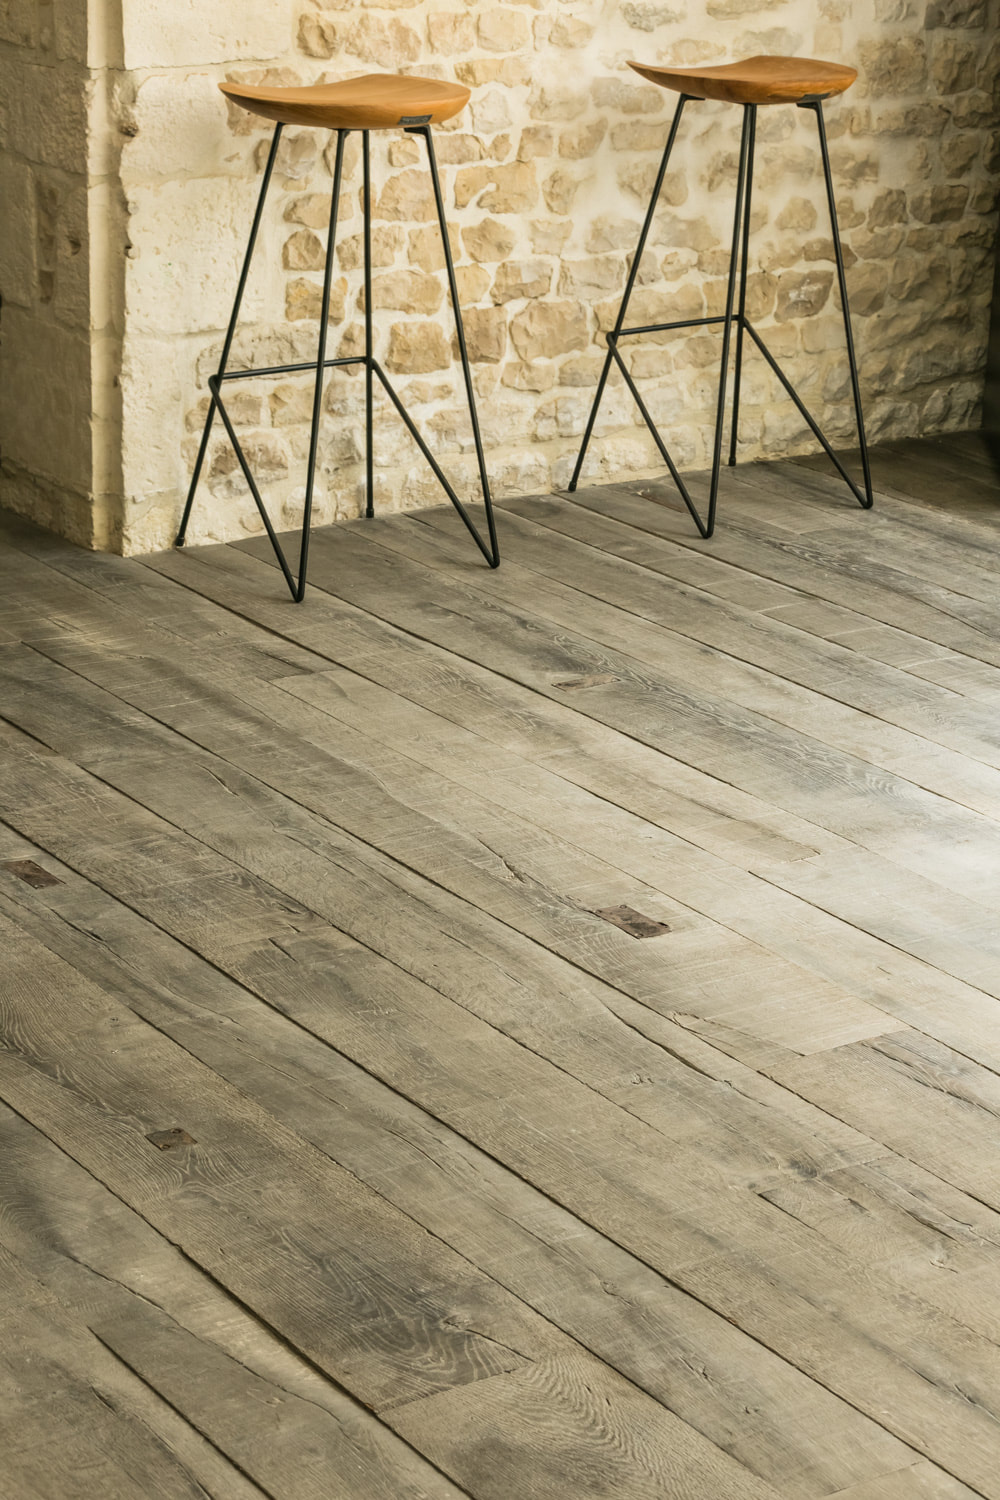 Durable oak wood flooring from Industrial Heritage Collection